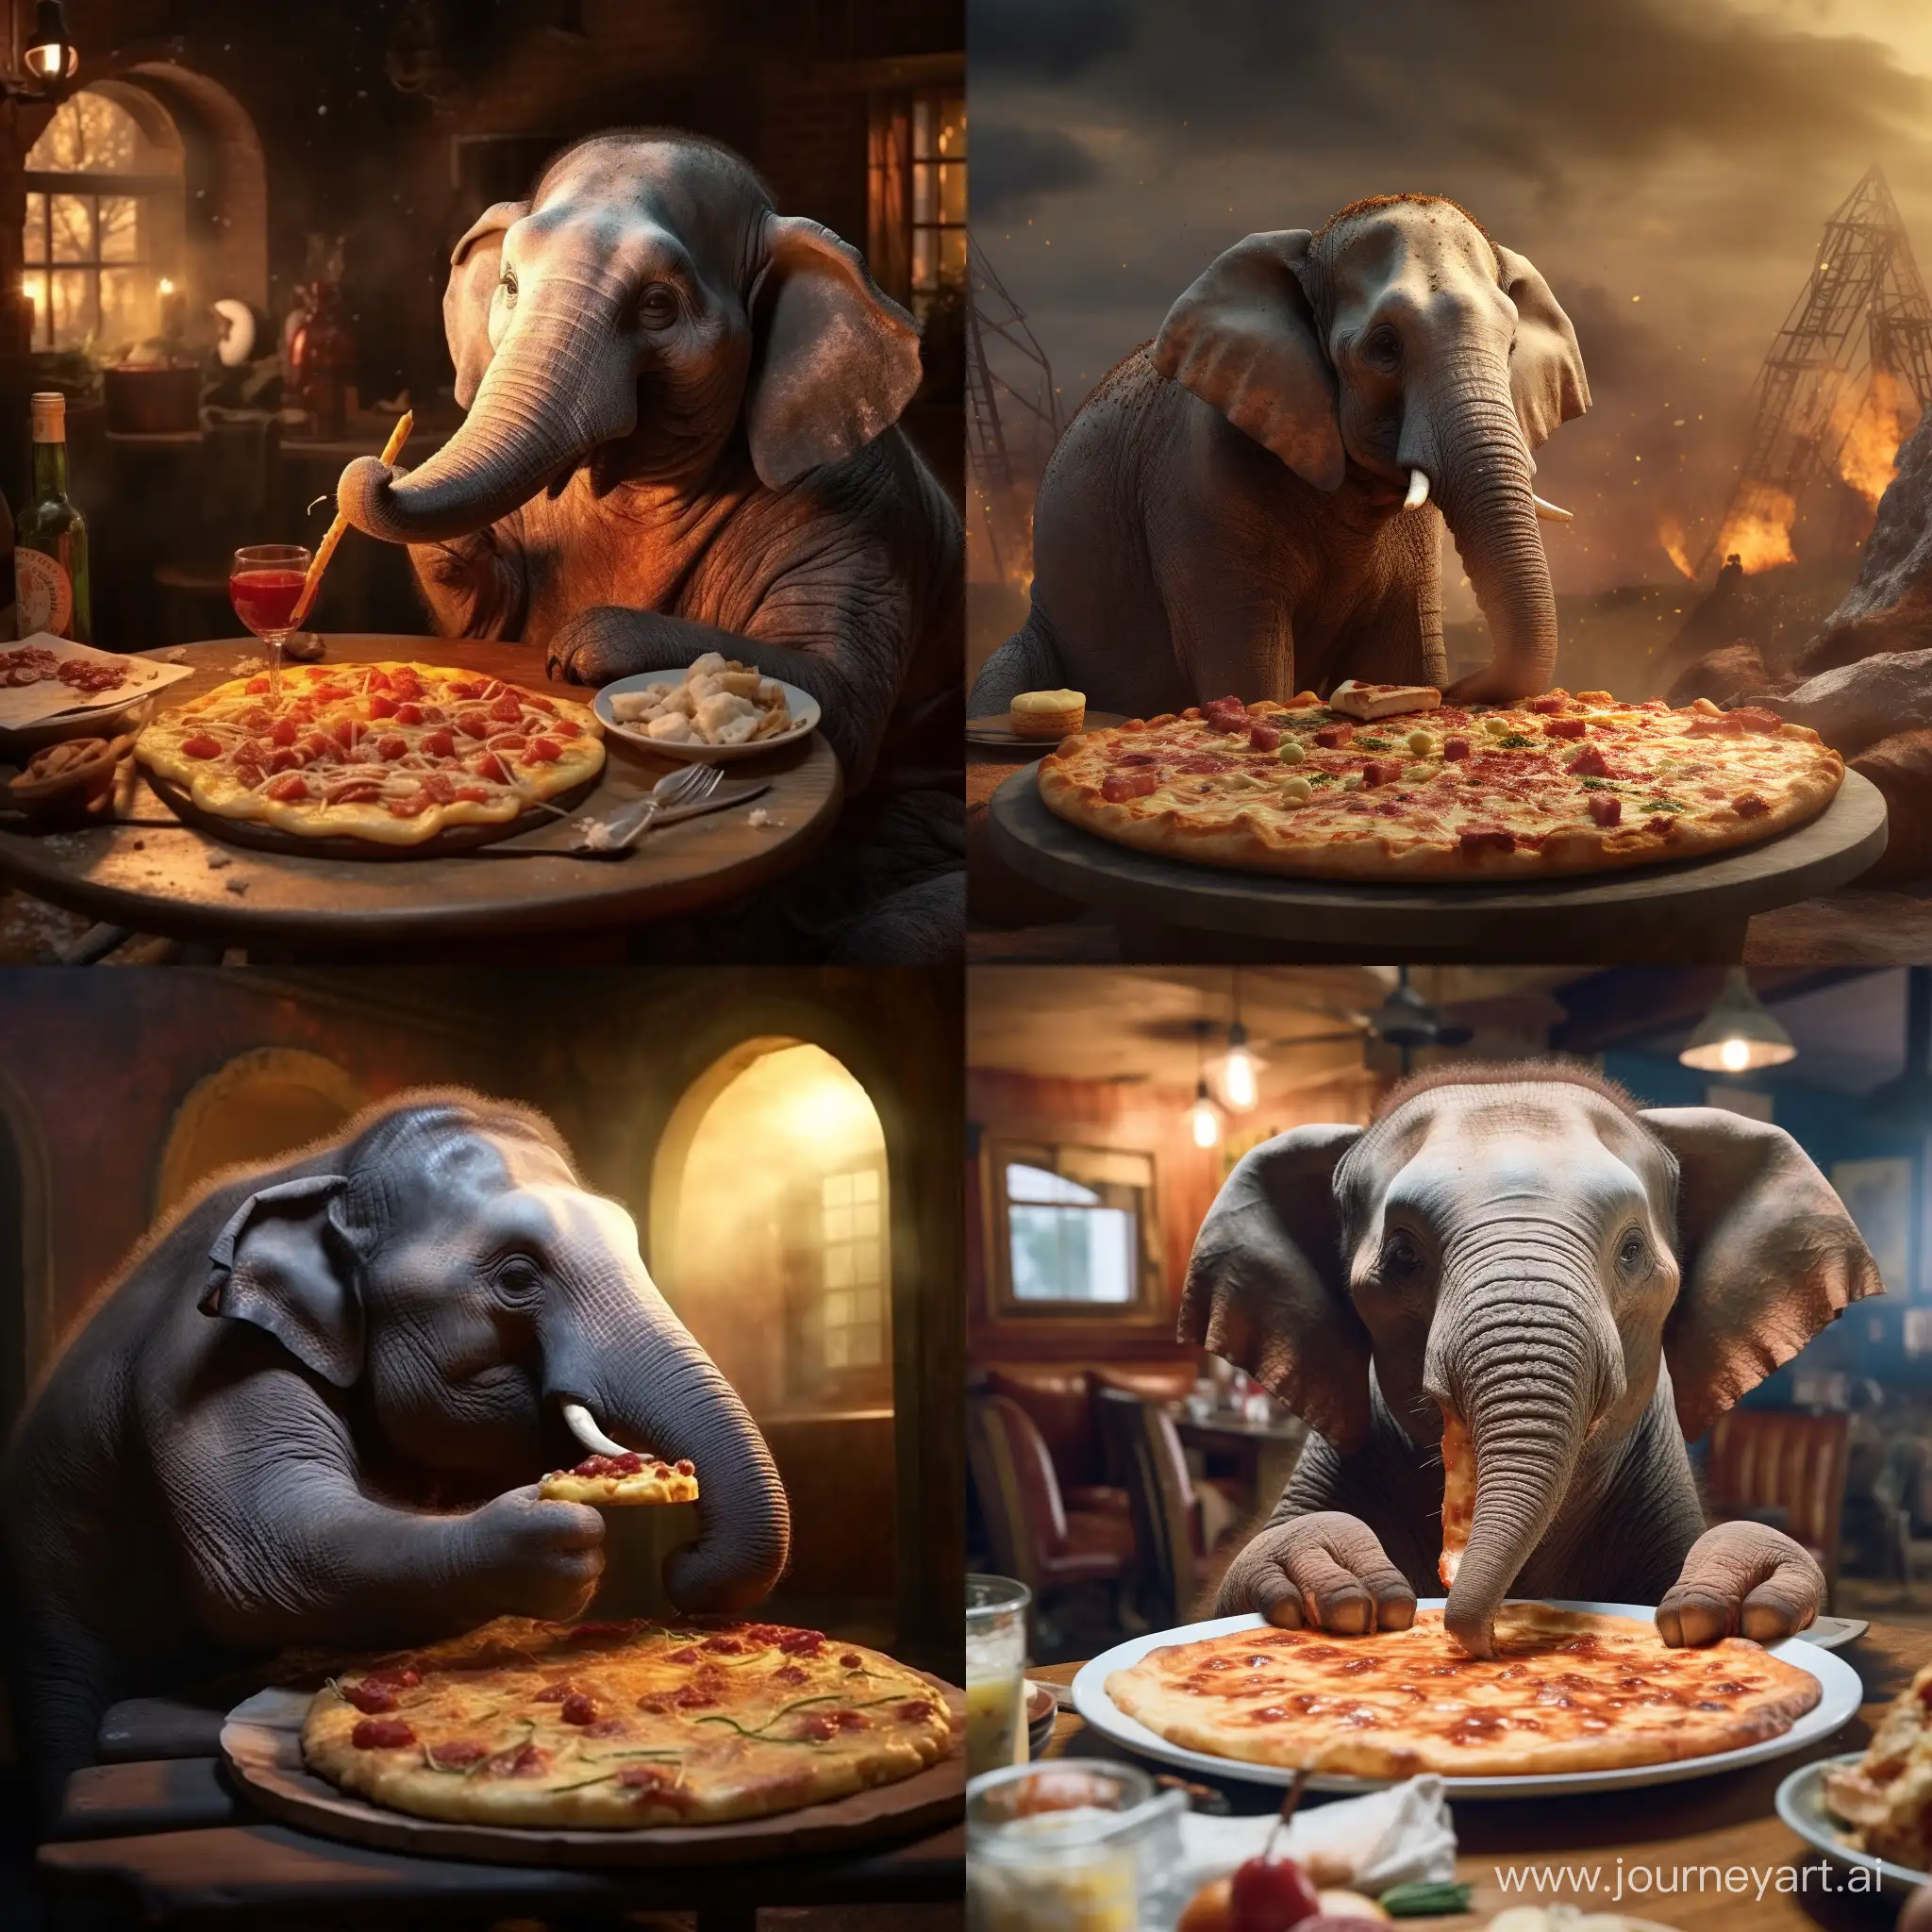 An elephant is eating pizza